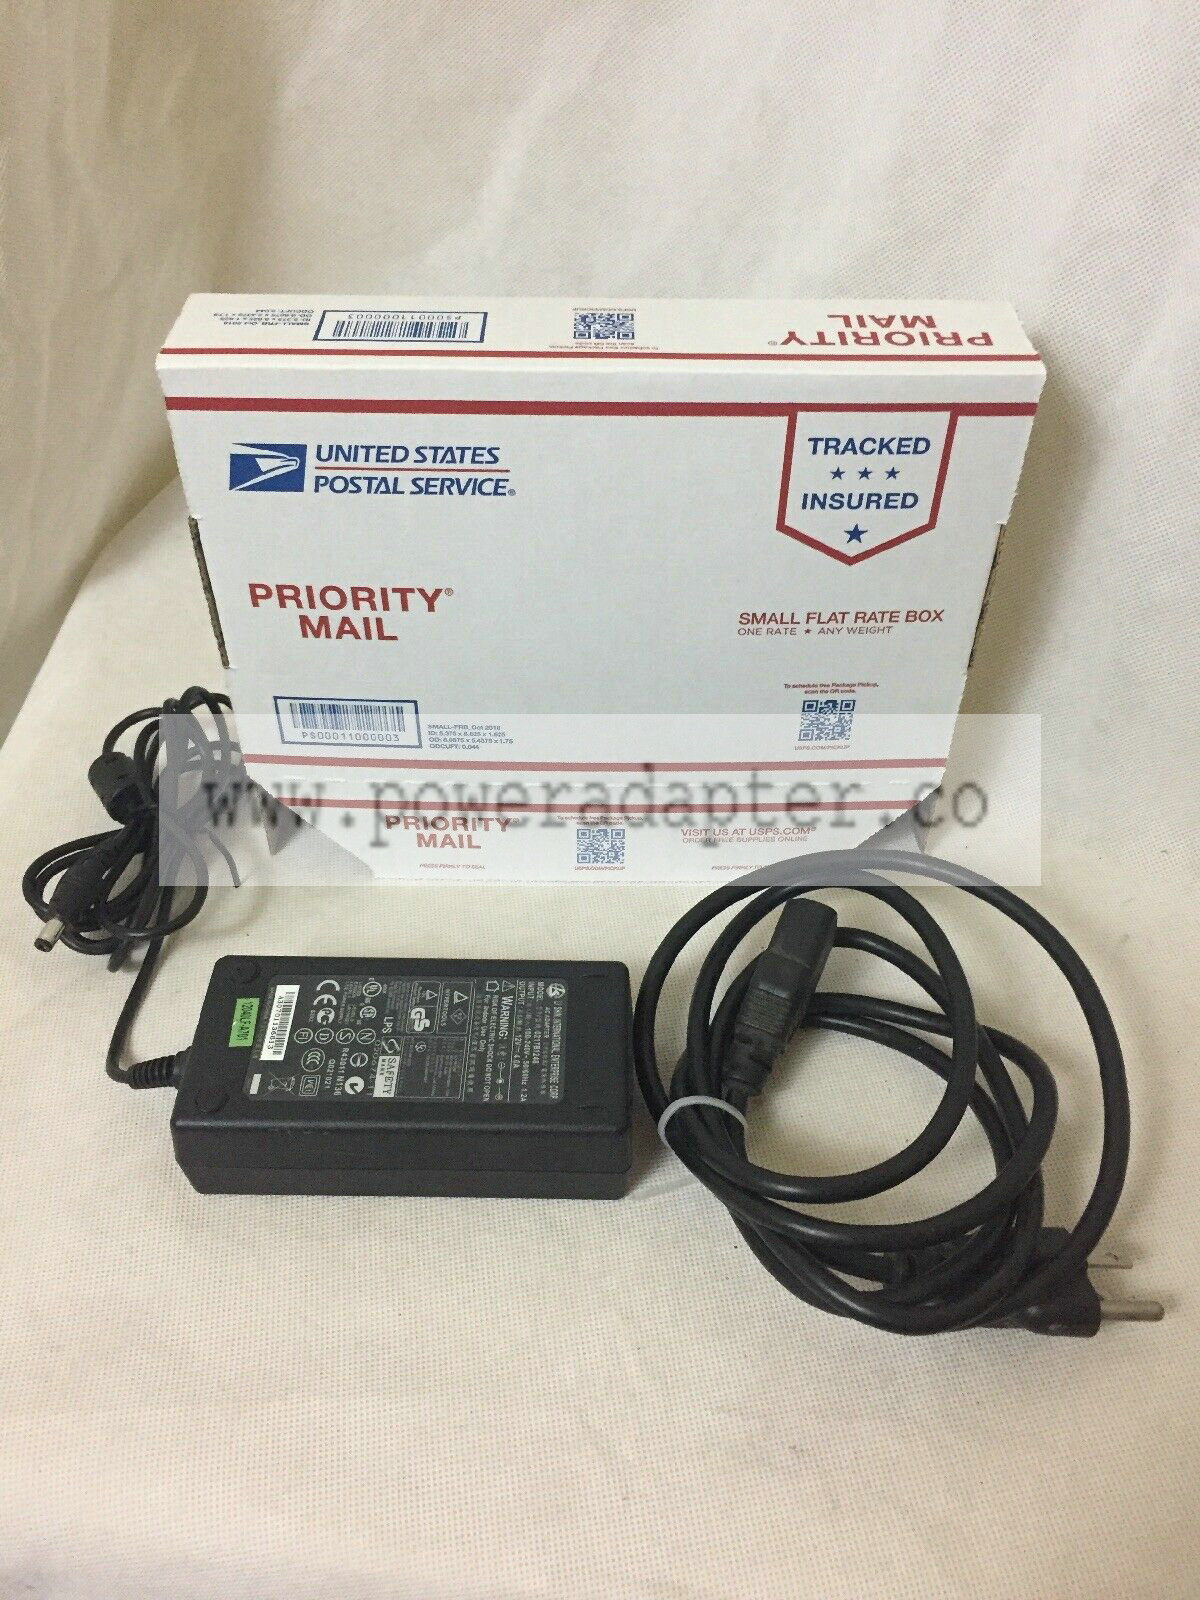 Li Shin AC Adapter Power Supply 12v 4a Model 0217B1248 020674-11 Tested Working Output Voltage(s): 12 V MPN: Does No